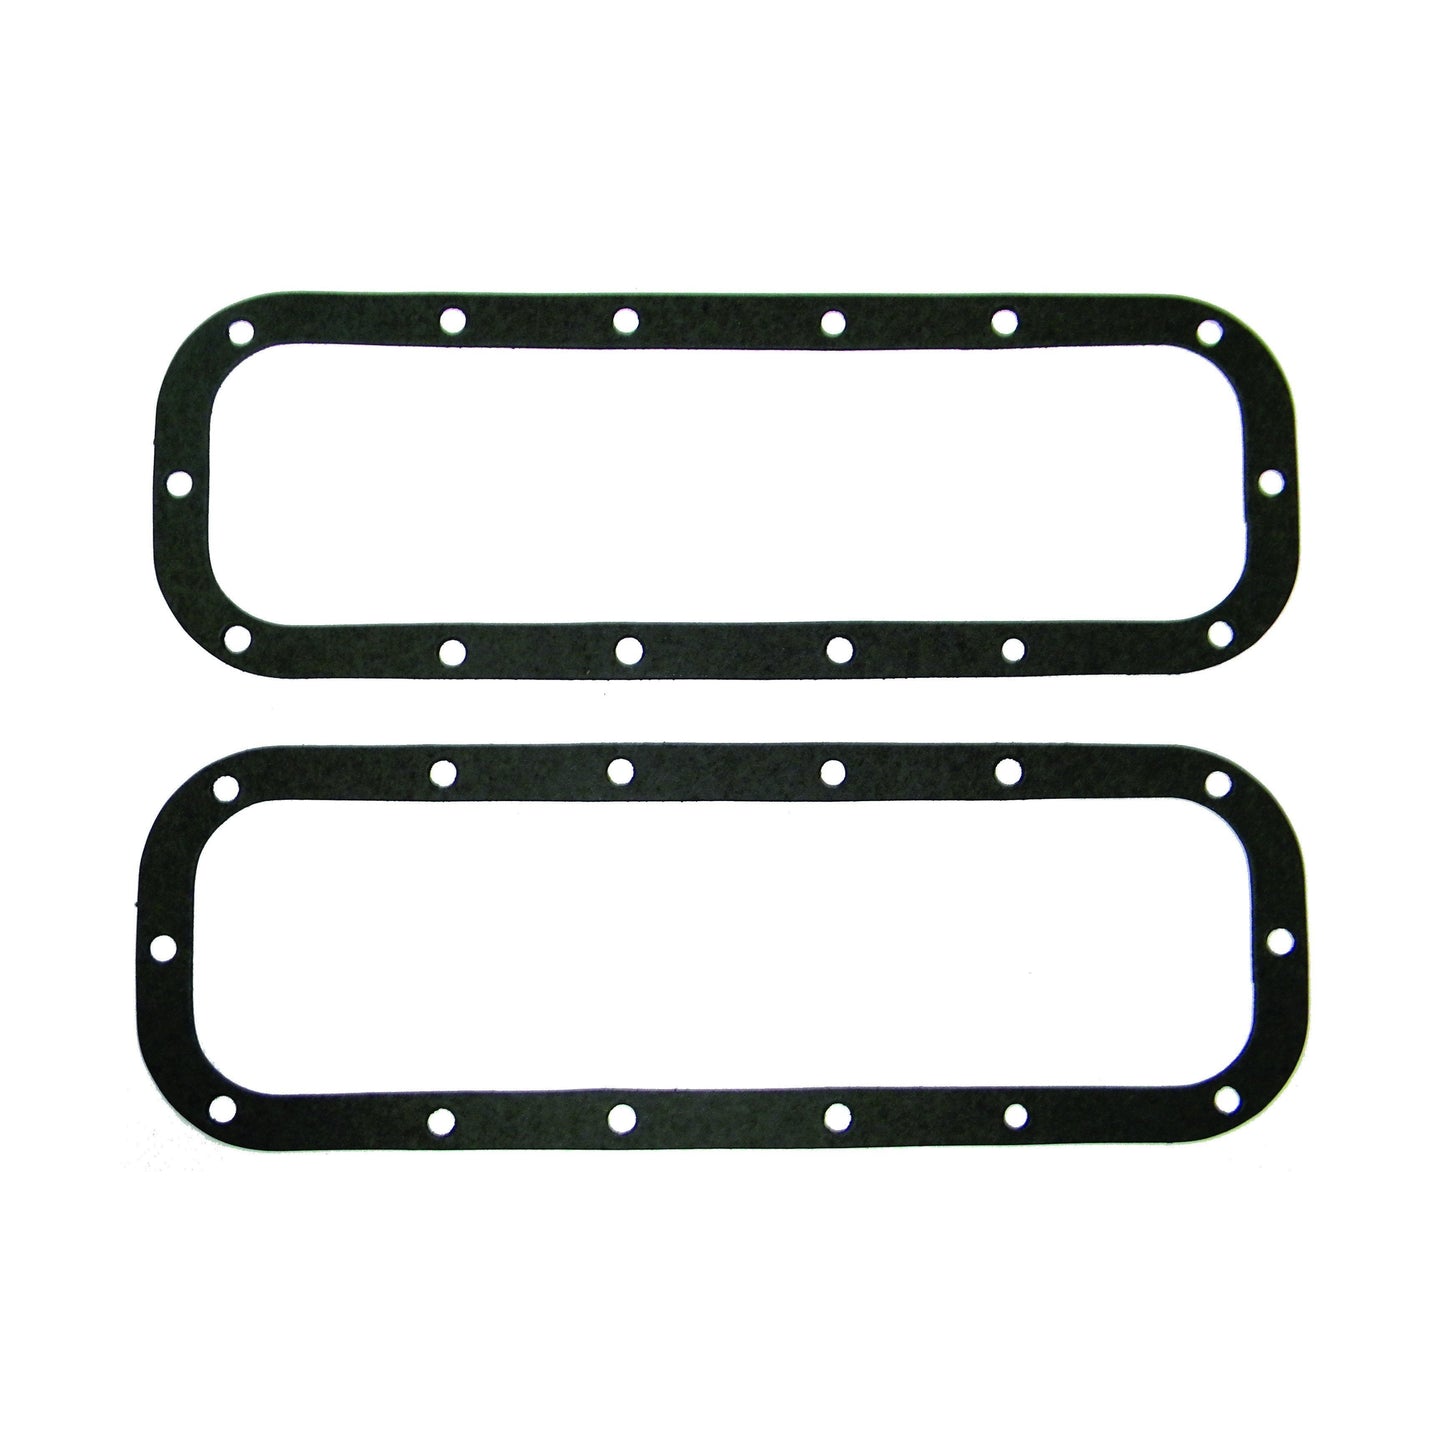 F010024 | SET LIFTER COVER GASKET | Replace 601GC31D | EGS-3900-037